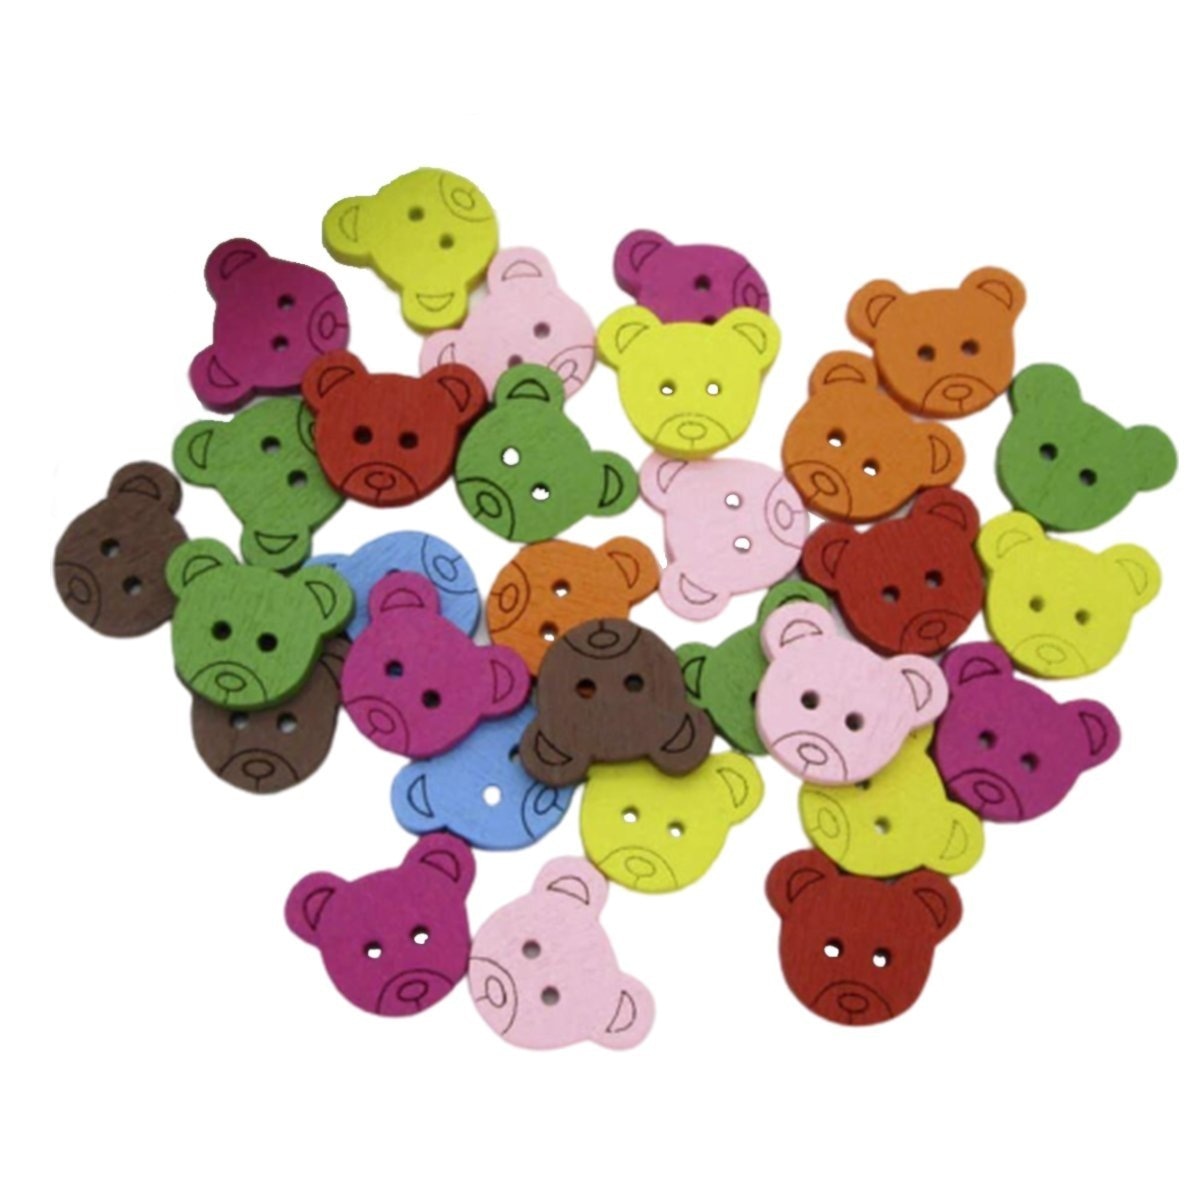 50pcs 19mm Teddy Bear Clothing Wooden Buttons 2 Hole Flatback Sewing Colourful